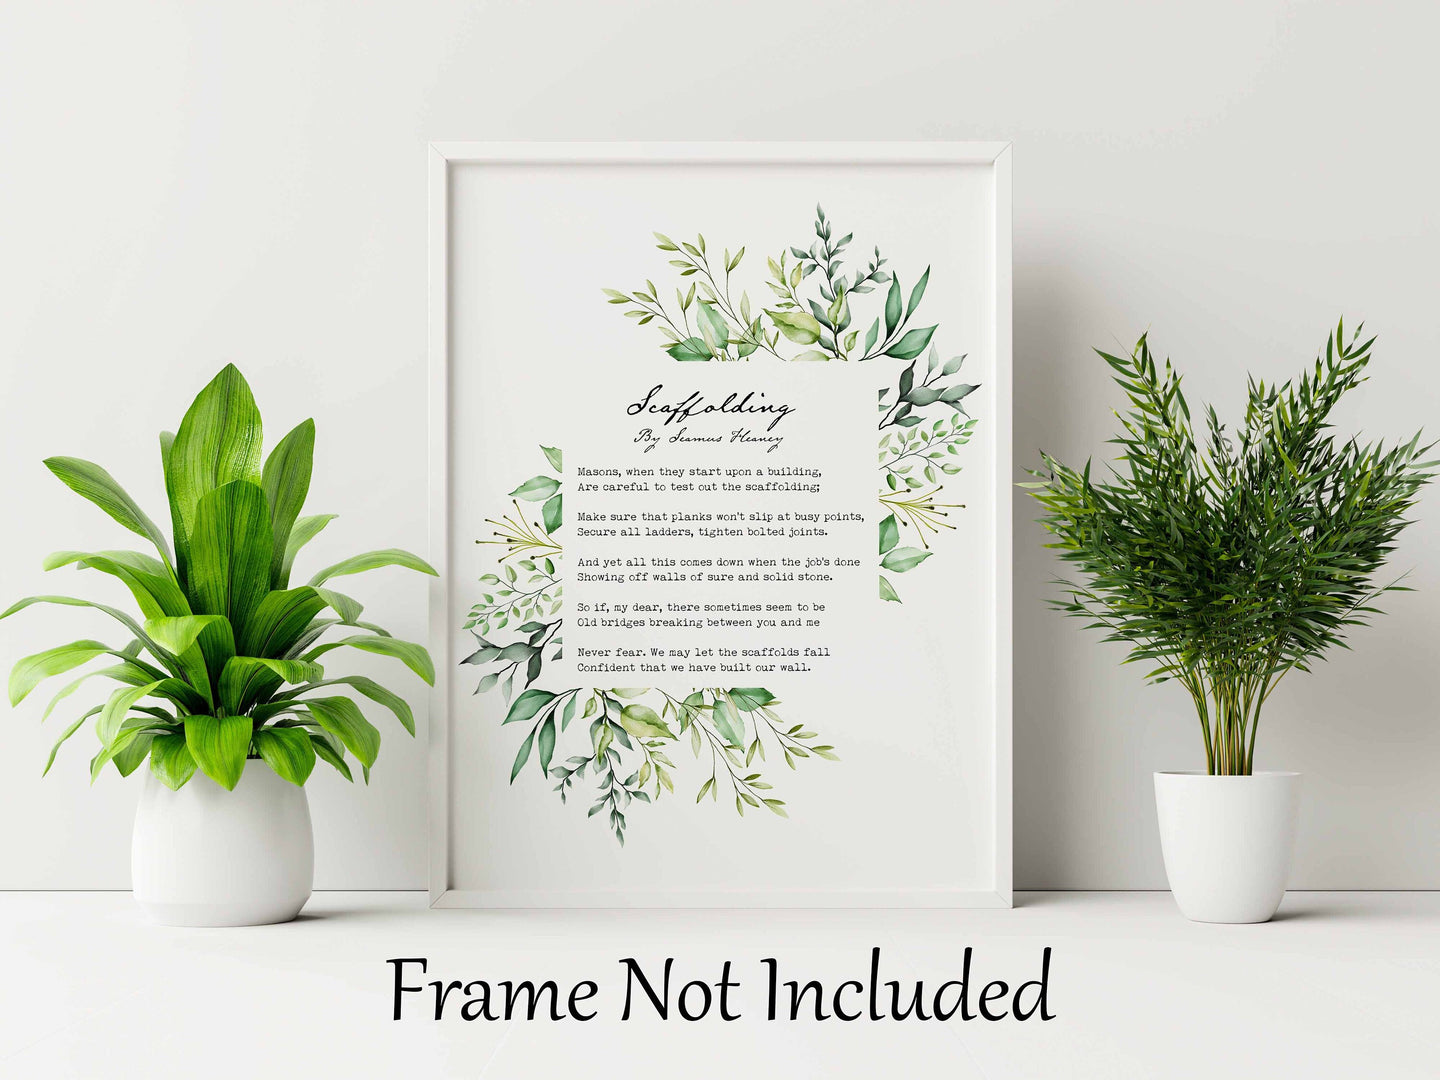 Walt Whitman Quote Leaves of Grass Print, This Is What You Shall Do - Inspirational Poetry - Framed And Unframed Options